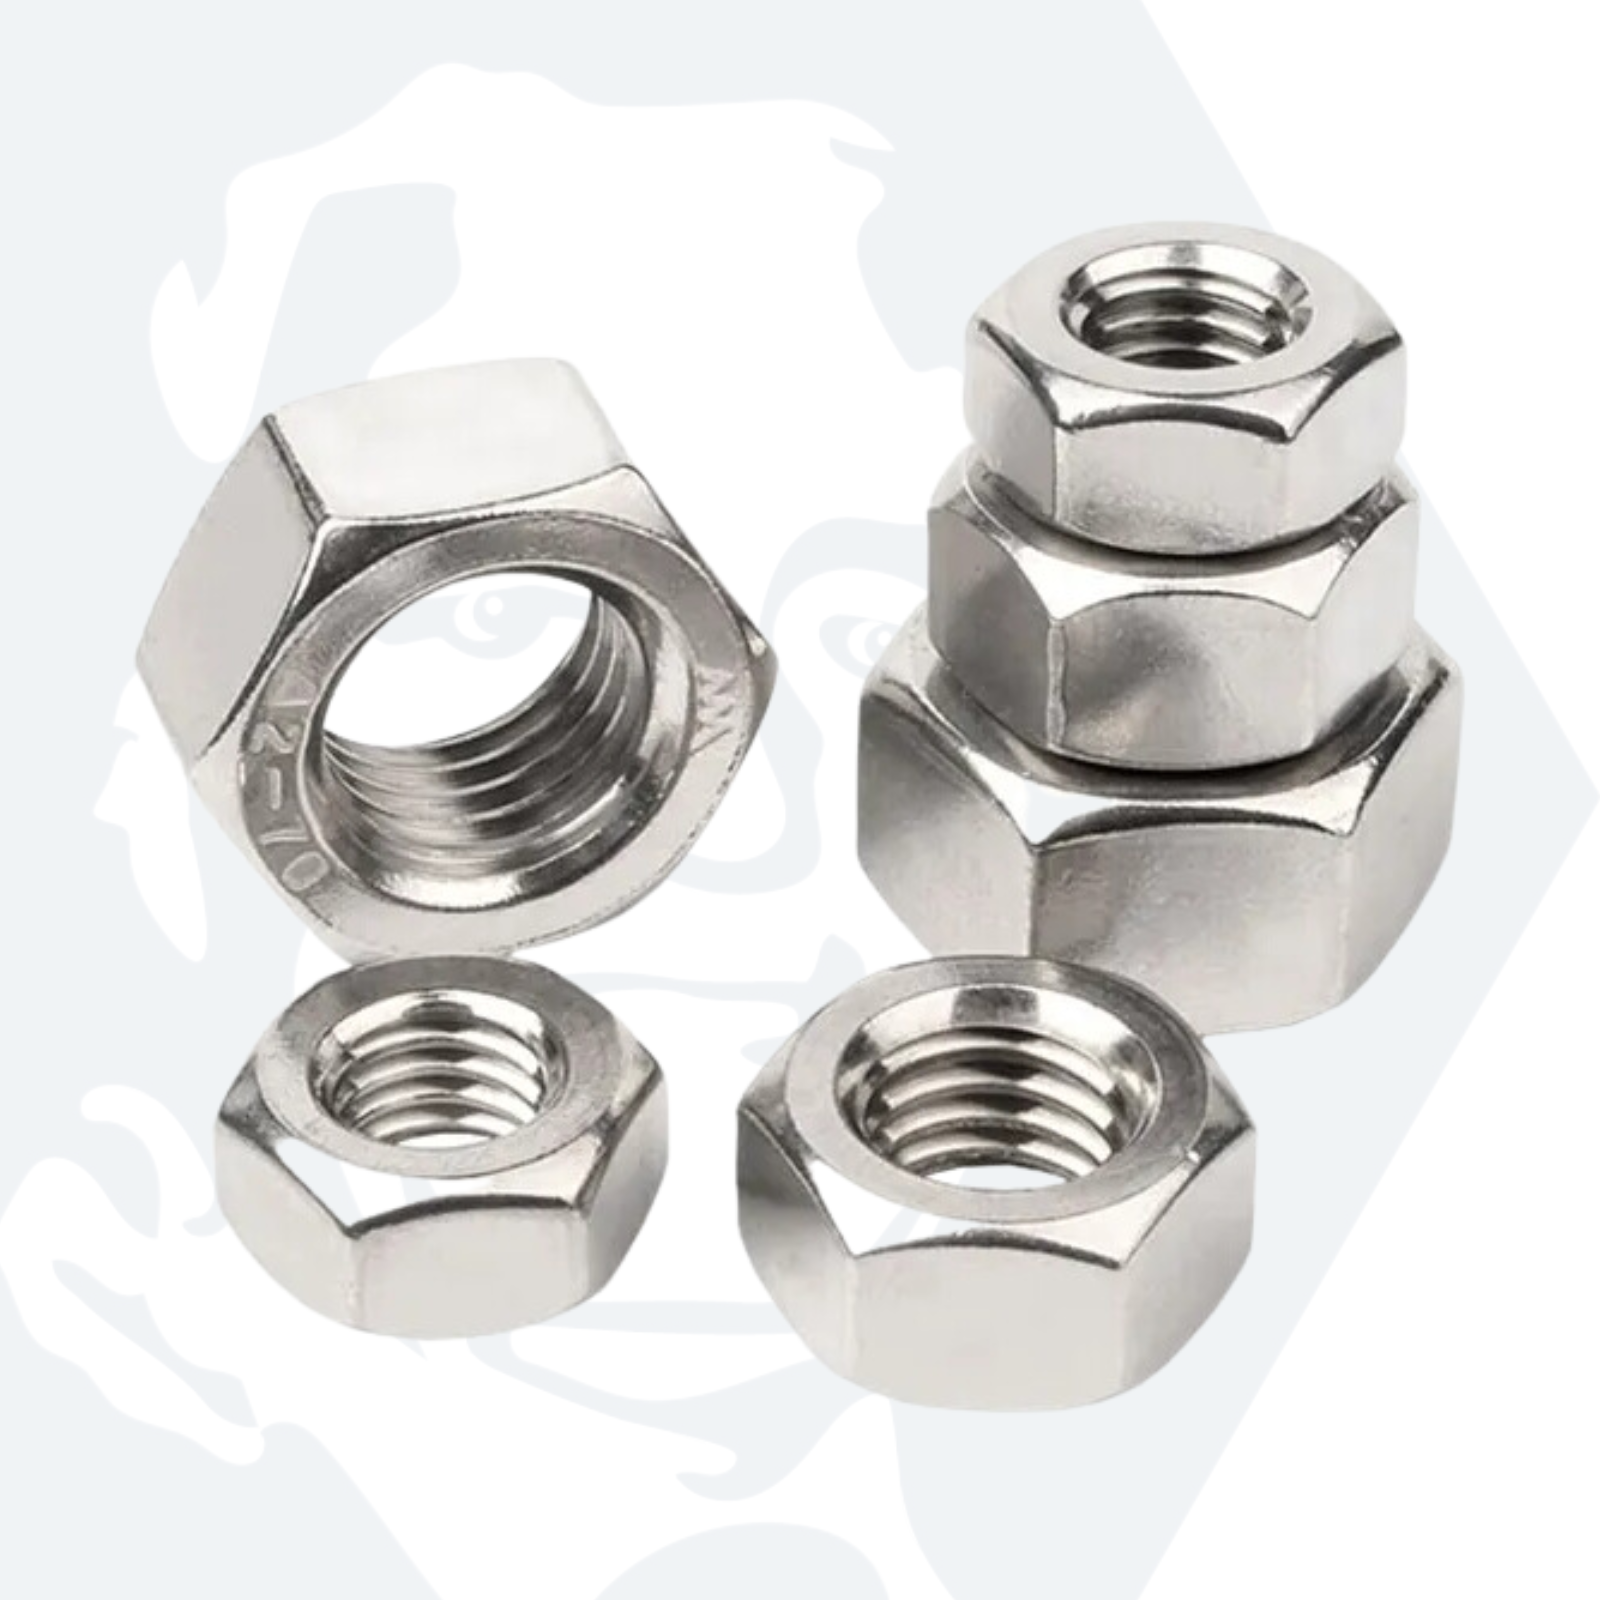 M5 Hexagon Nuts (DIN 934) - Stainless Steel (A2)